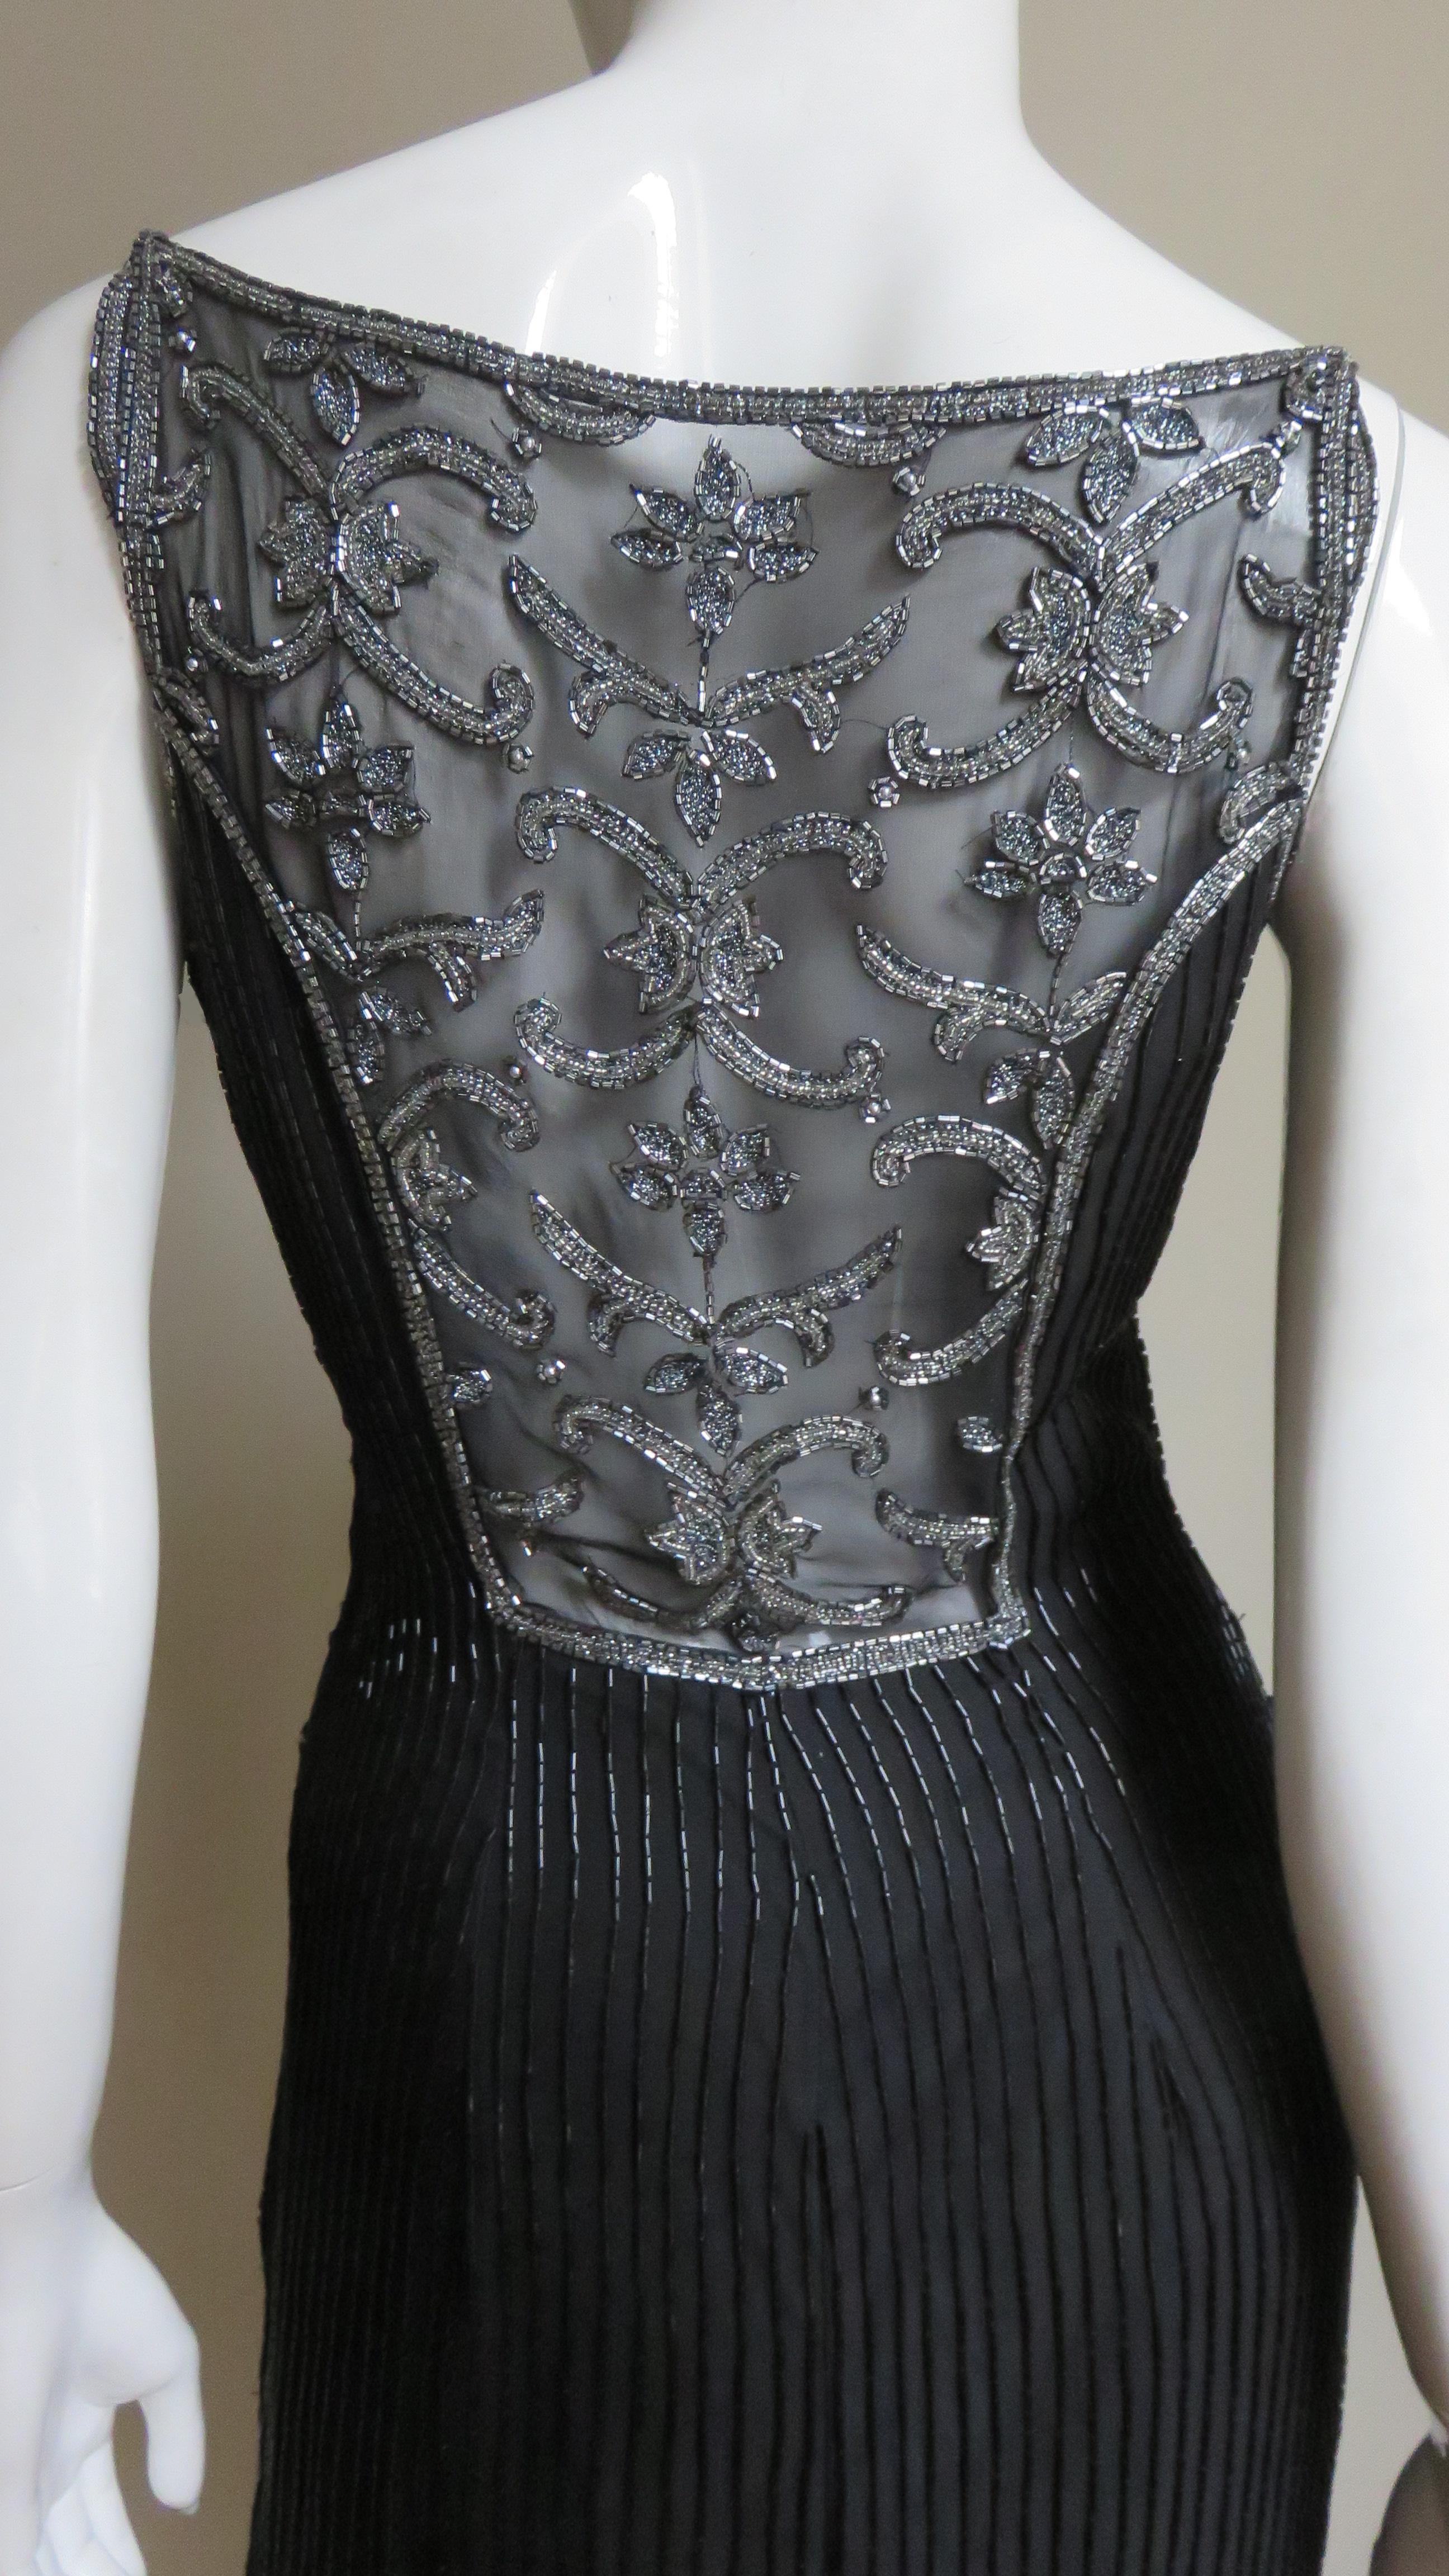 Sonia Rykiel Silk Beaded Gown with Elaborate Sheer Back 1990s For Sale 3